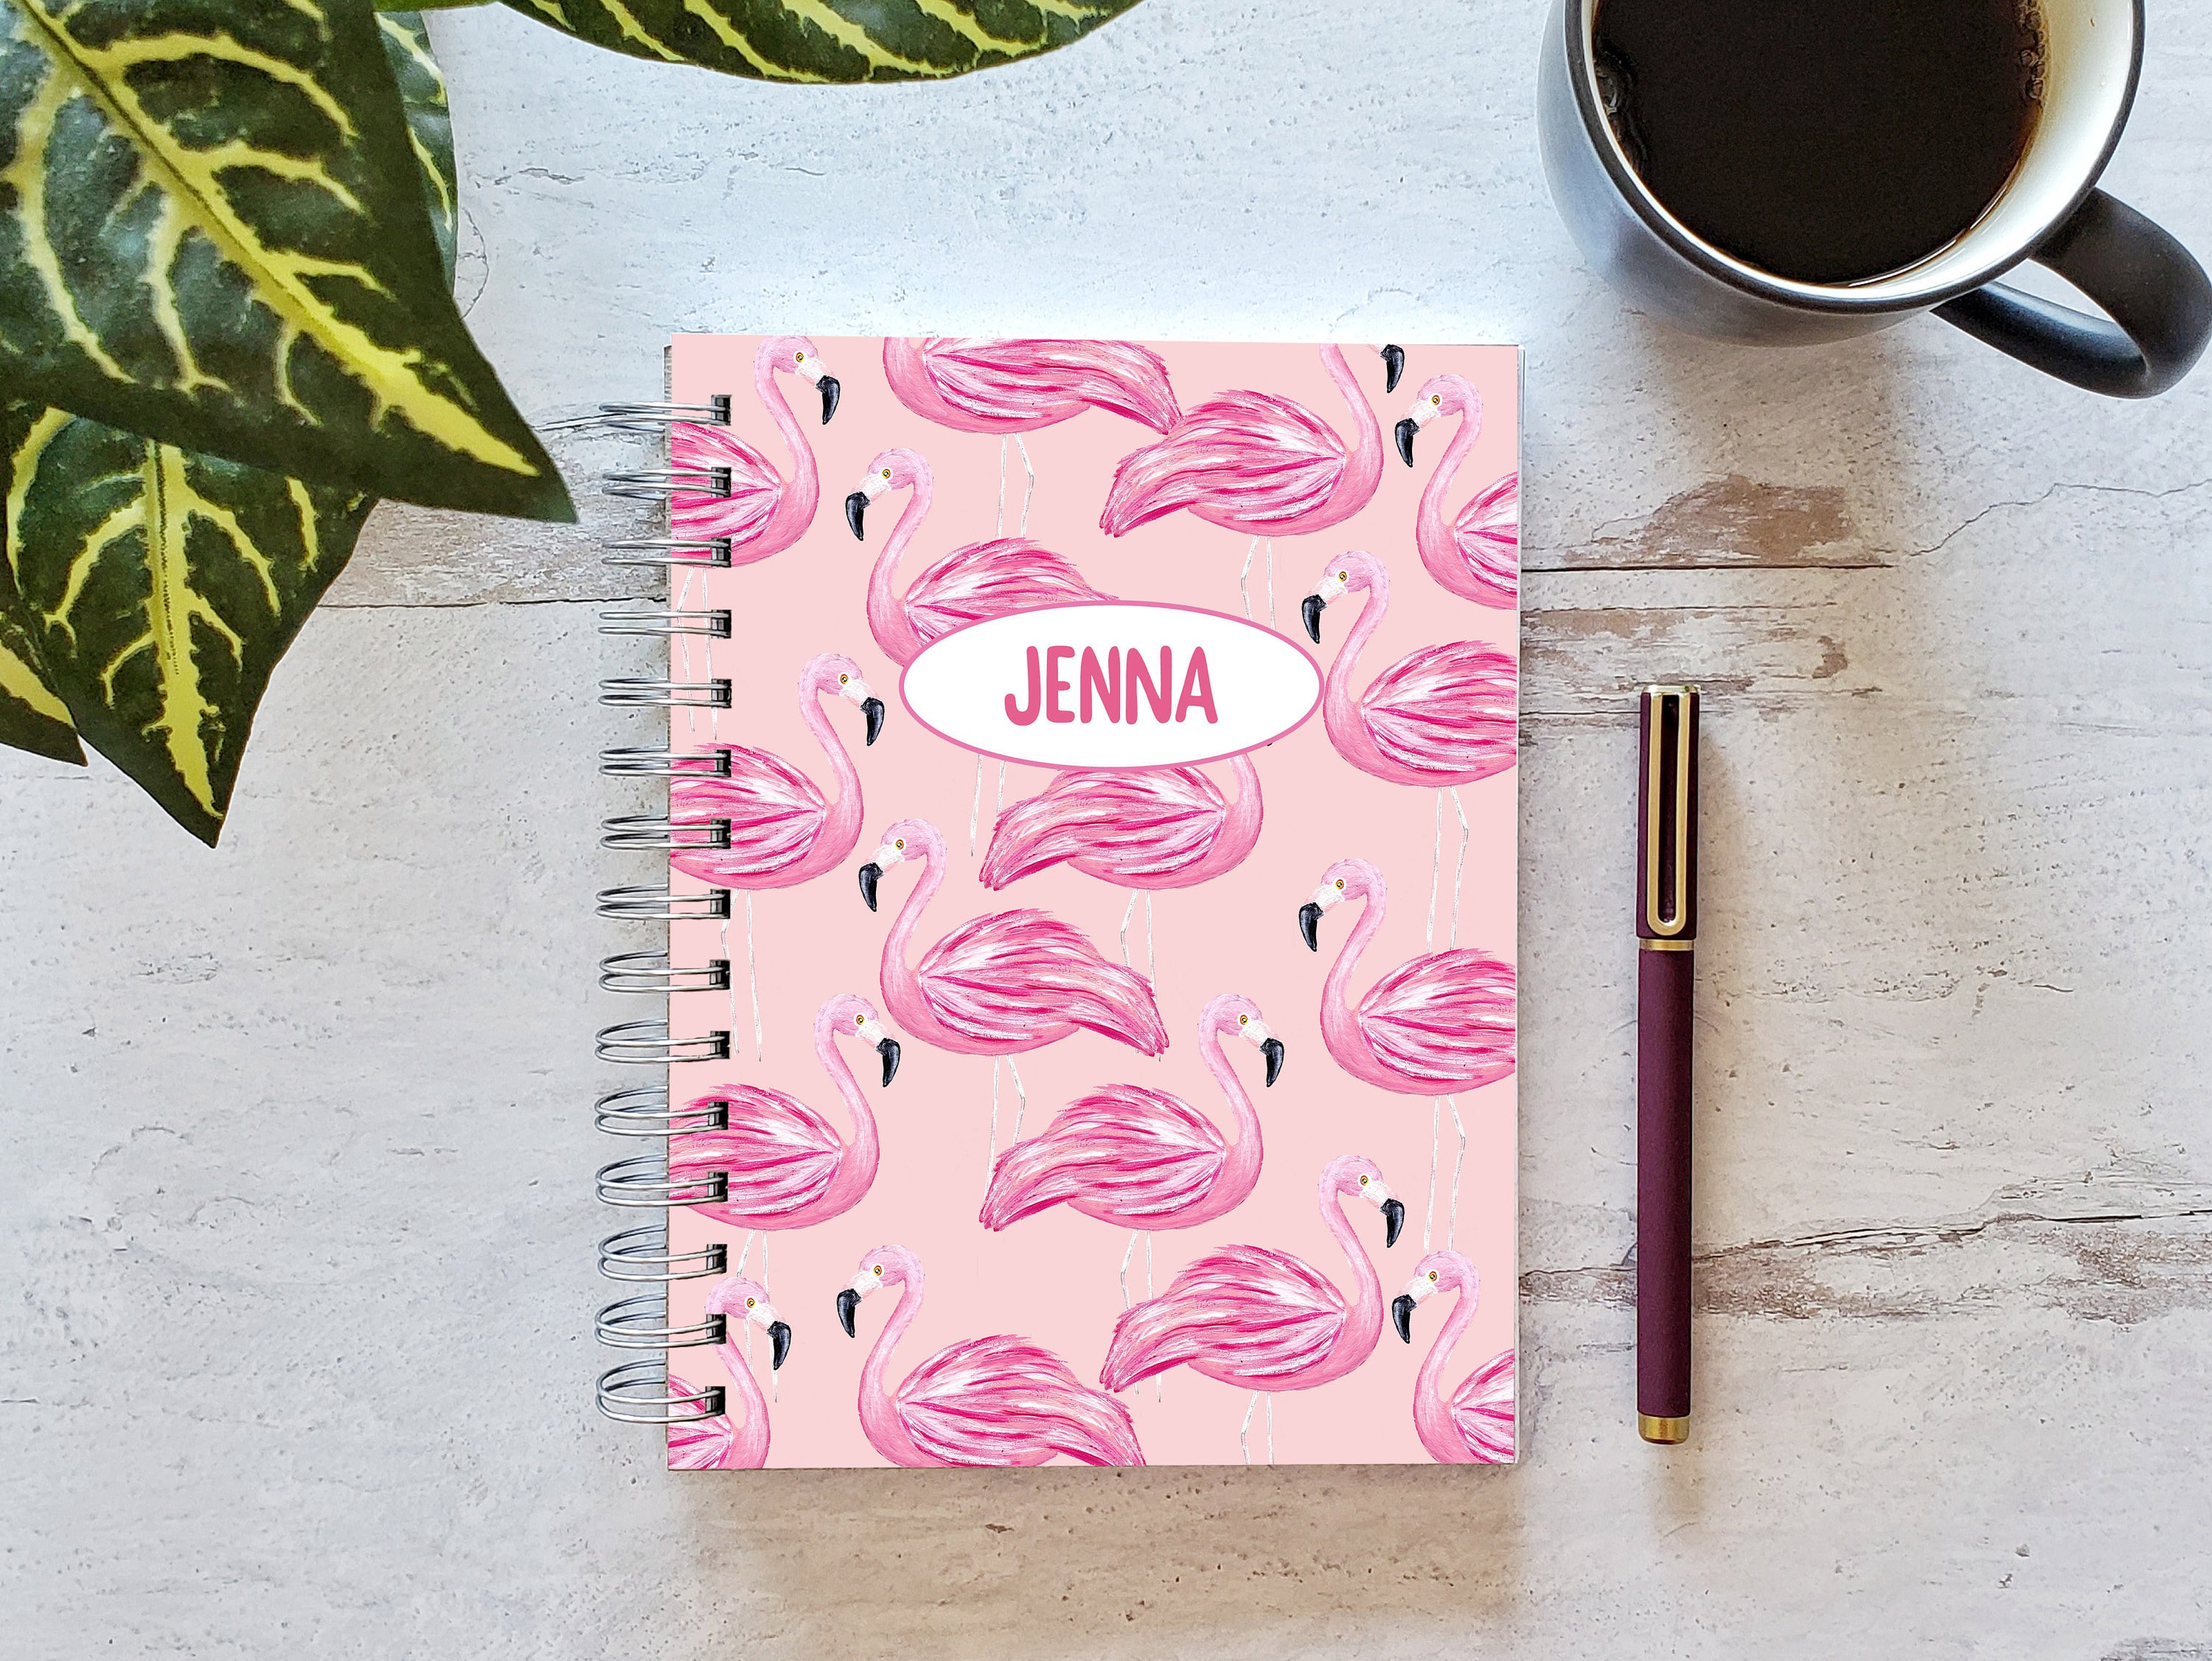 NUOBESTY Pink Flamingo Notebooks with Pen Journal Set Notebooks Creative Diary Notepads Office School Stationery Gifts 